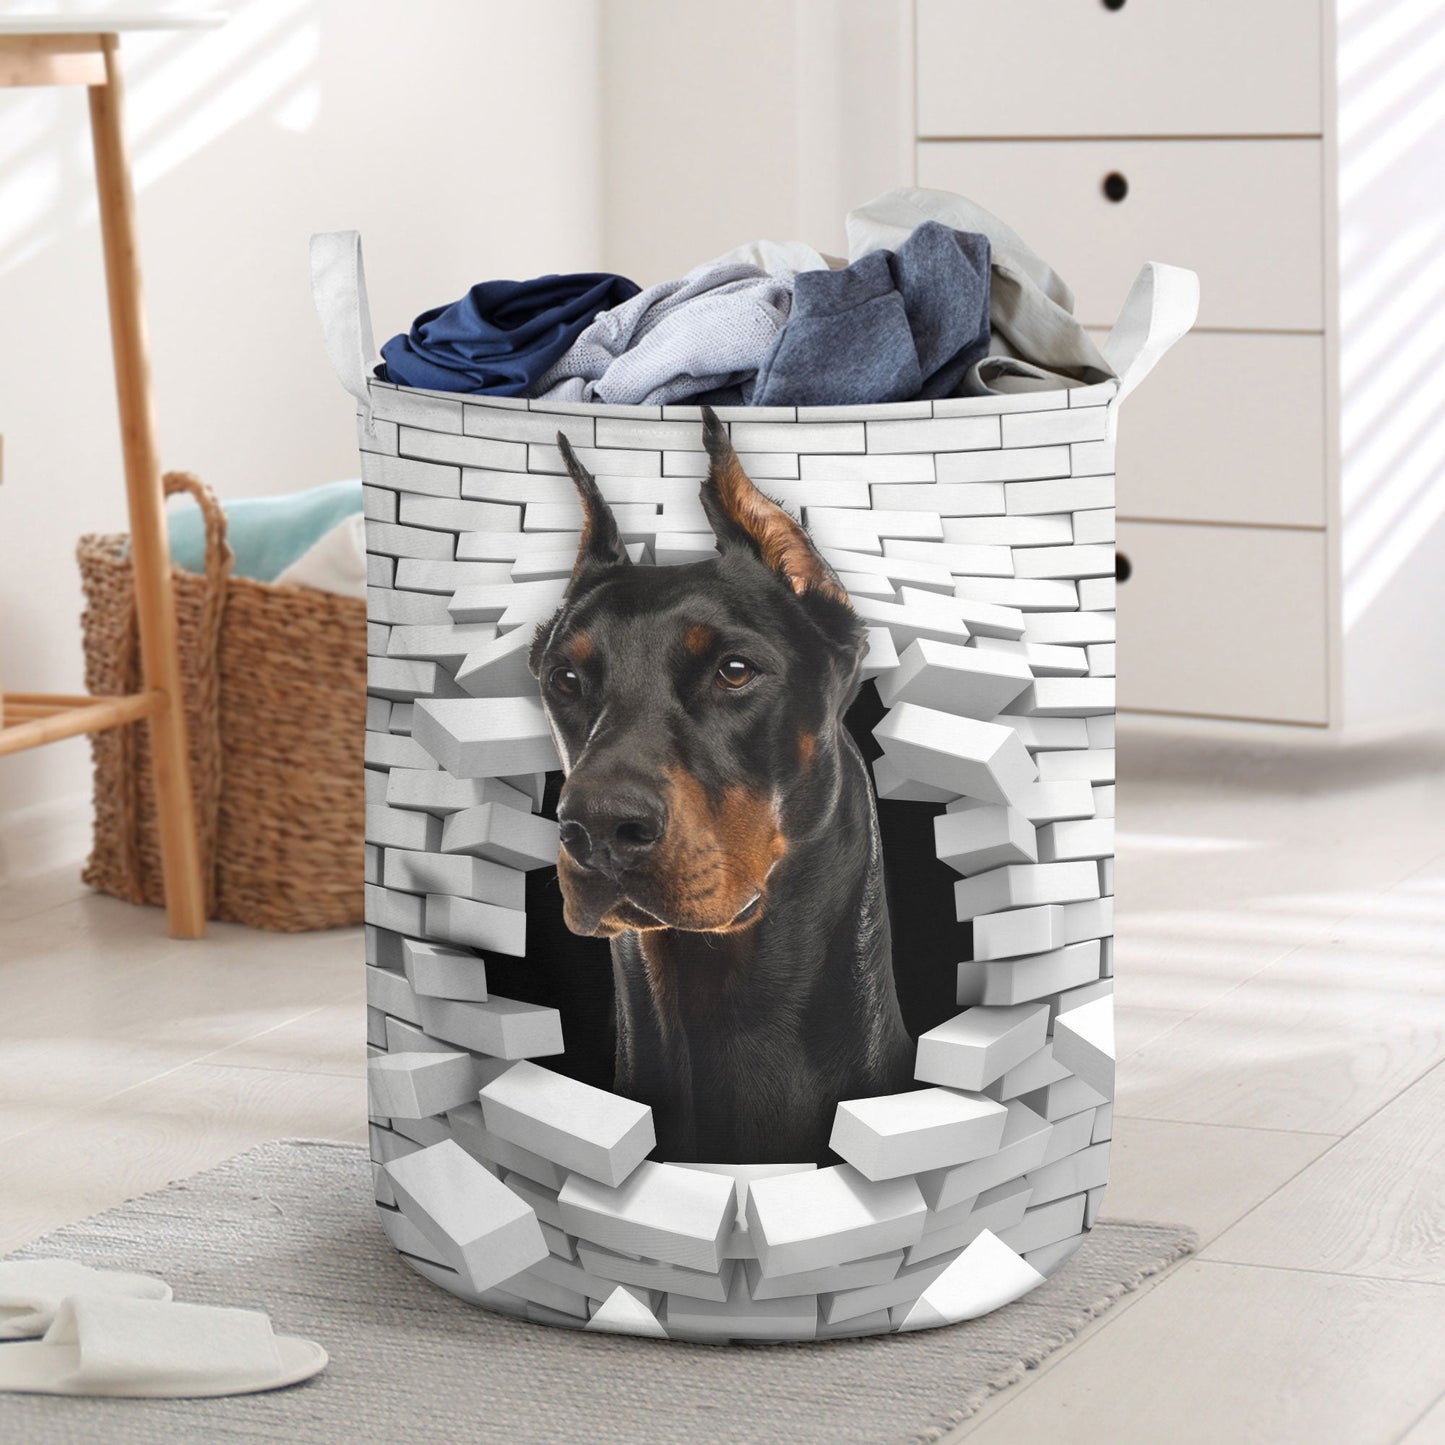 Doberman Pinscher - In The Hole Of Wall Pattern Laundry Basket